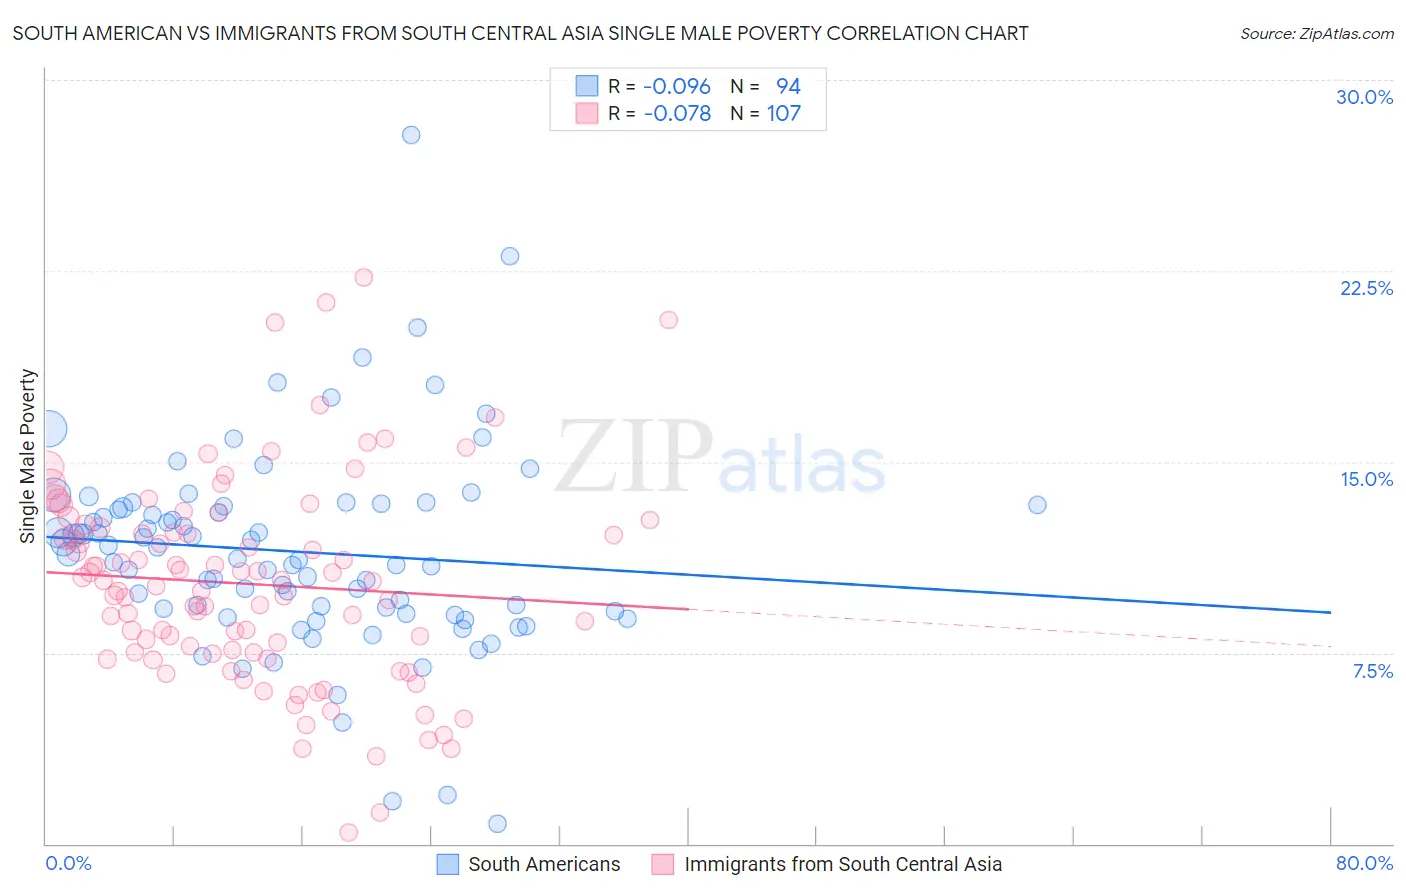 South American vs Immigrants from South Central Asia Single Male Poverty